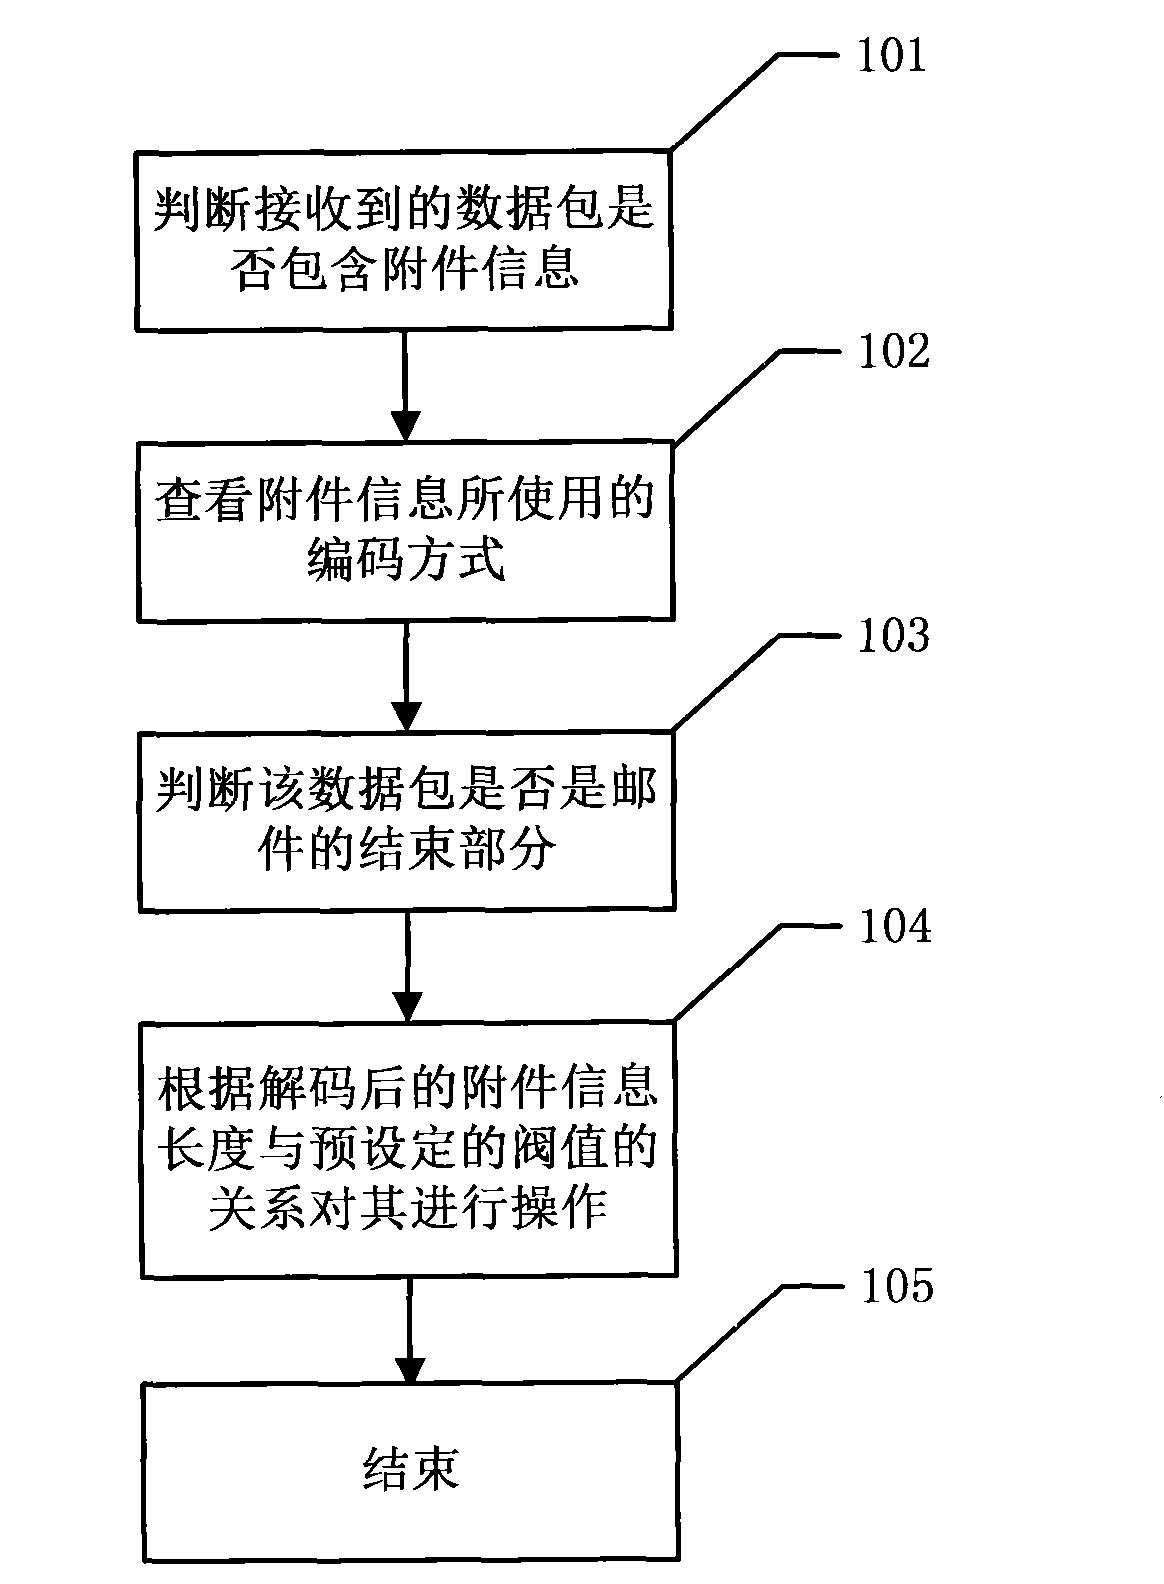 Packet-level dynamic mail attachment virus detection method